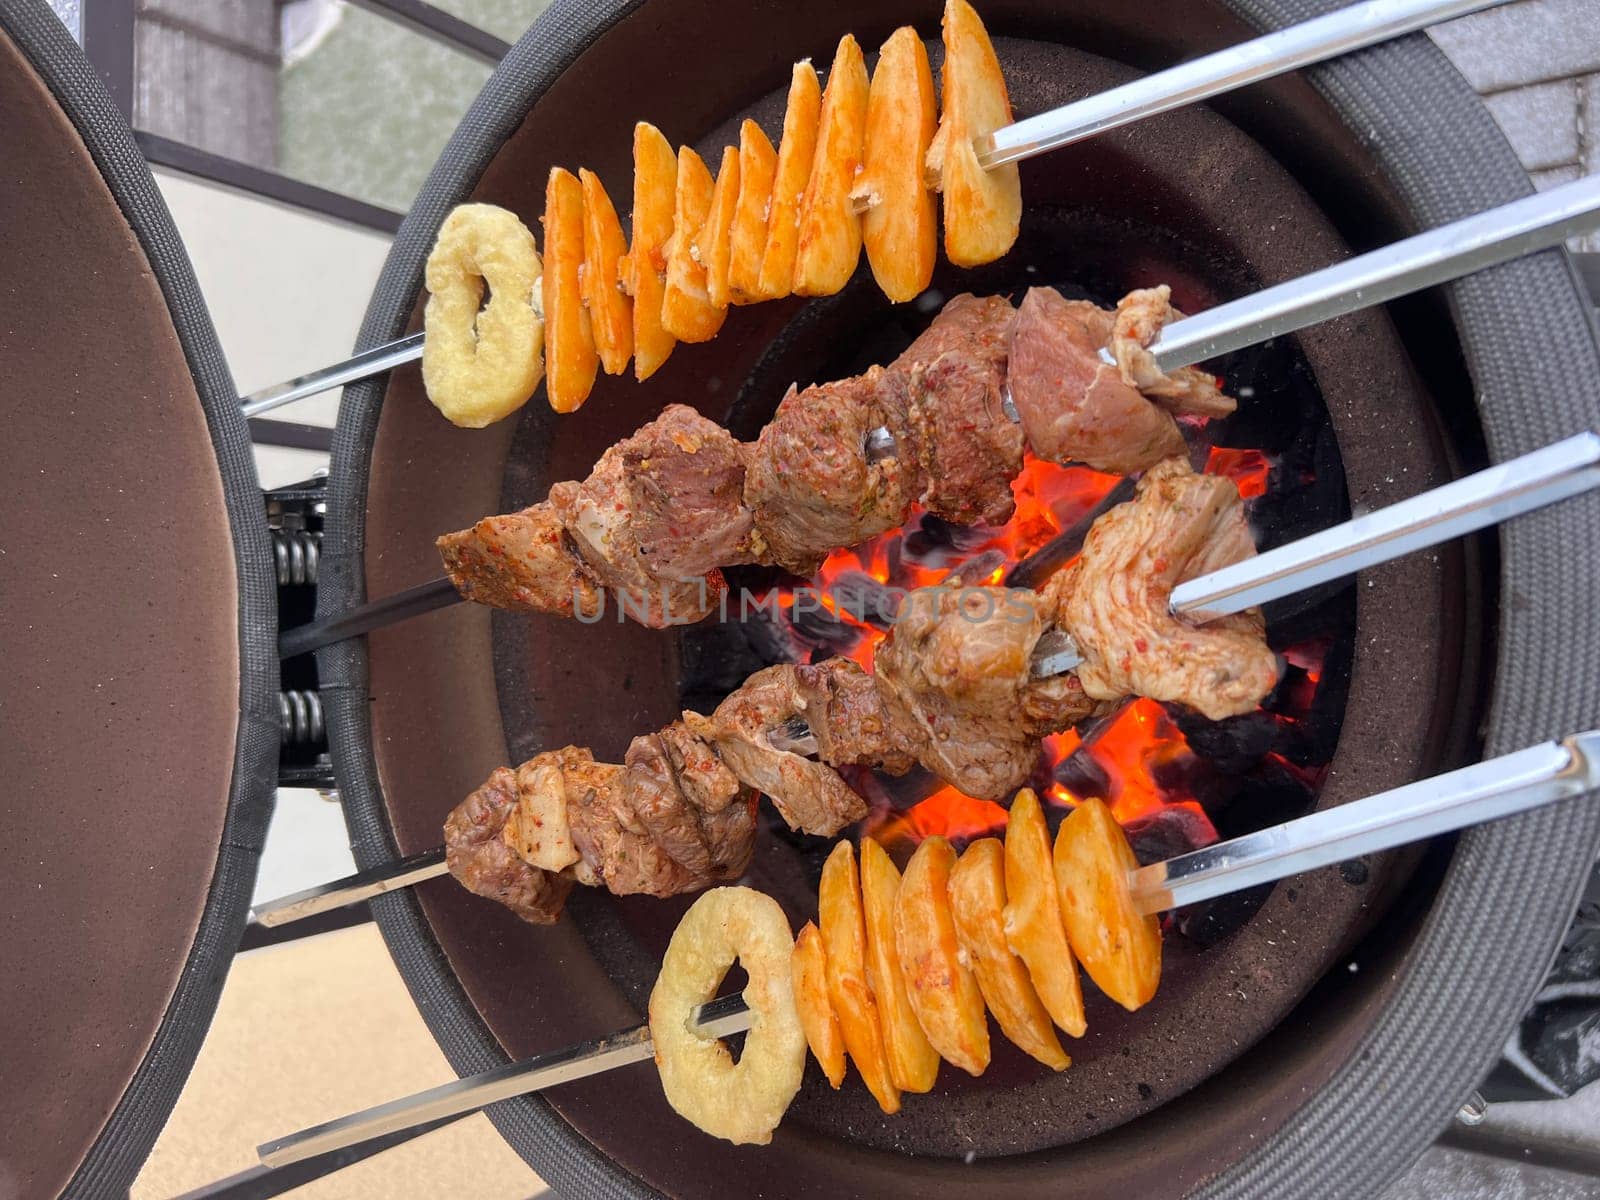 Egg grill cooking at home meat and corn meat bbq homemade. High quality photo